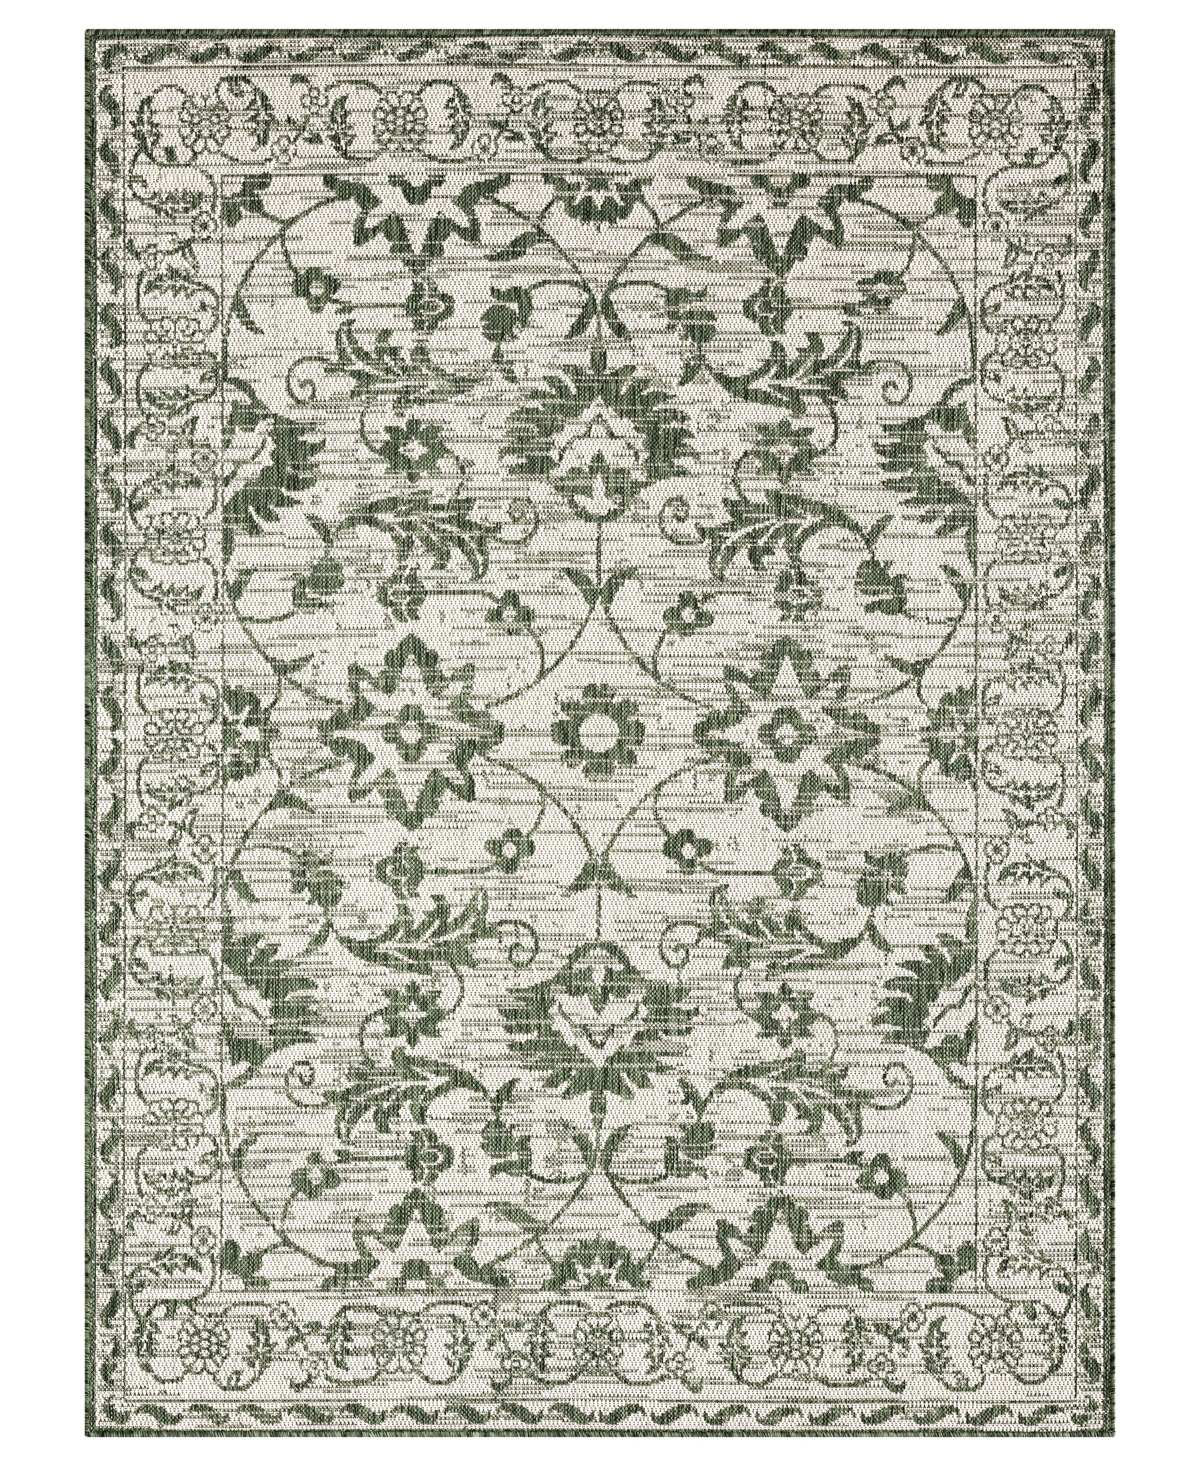 Nicole Miller Patio Country Ayala 5'2" X 7'2" Area Rug In Olive